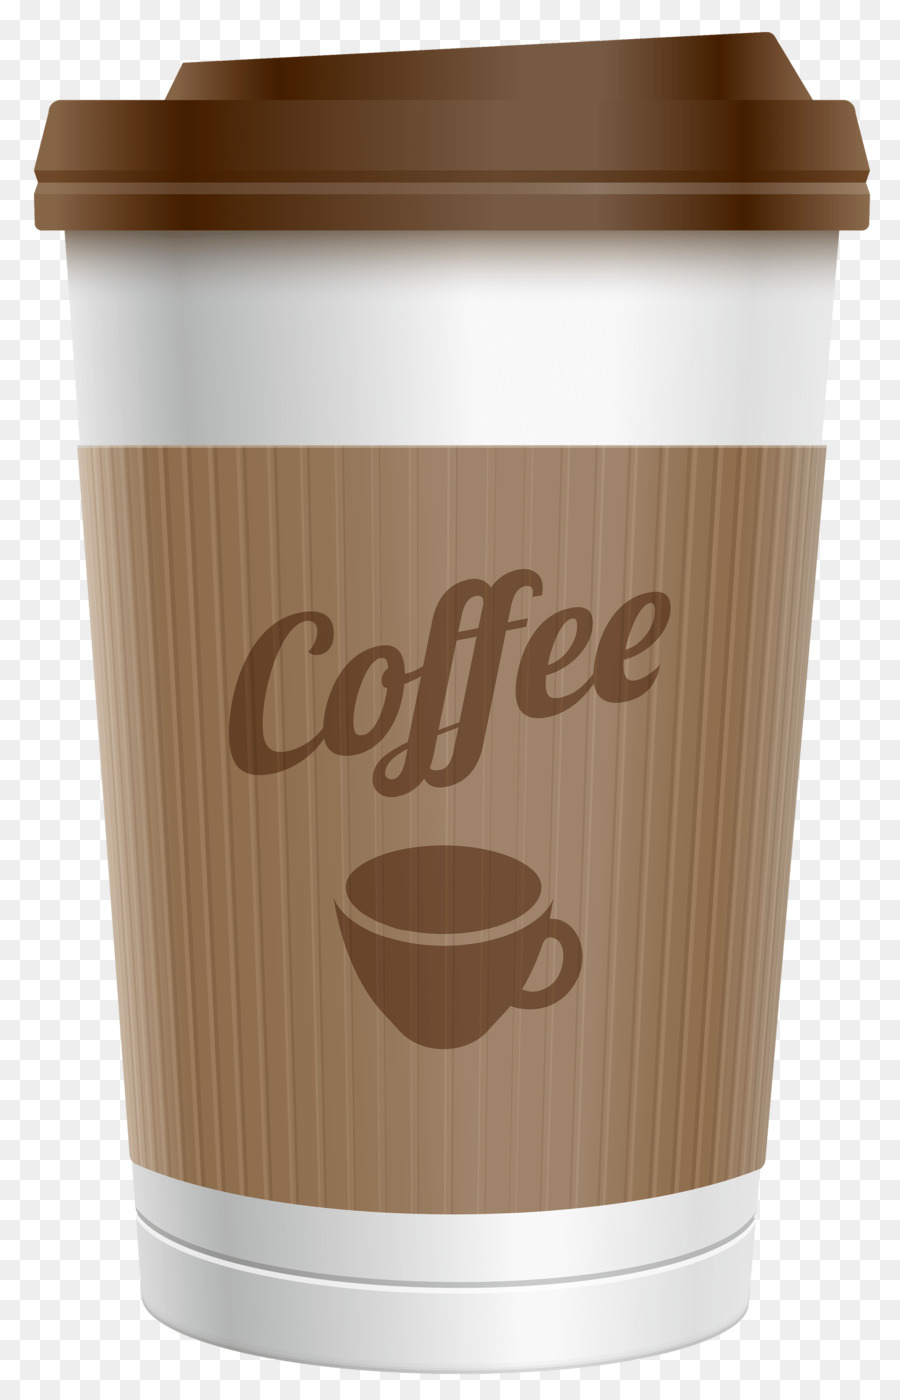 Coffee Espresso Cappuccino Milkshake Cafe - coffee png download - 1932*3000 - Free Transparent Coffee png Download.